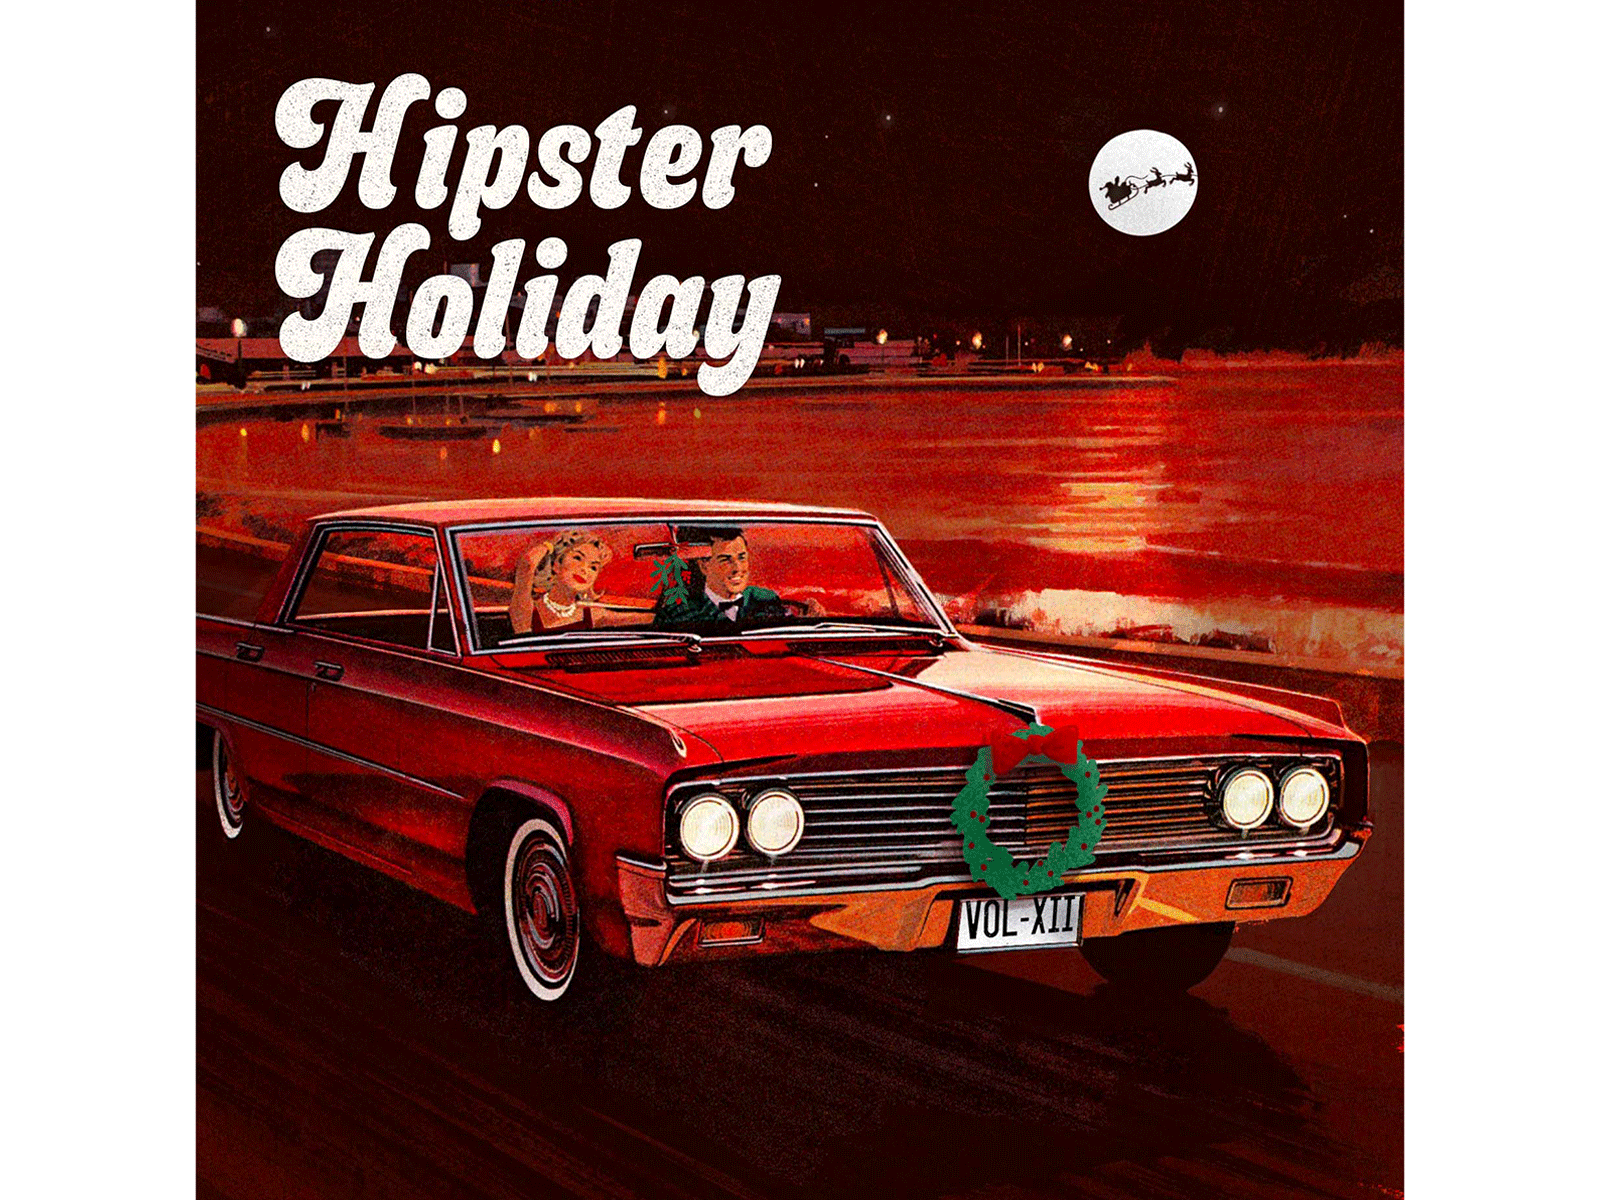 Hipster Holiday Vol. XII Playlist Cover Art album art christmas illustration music